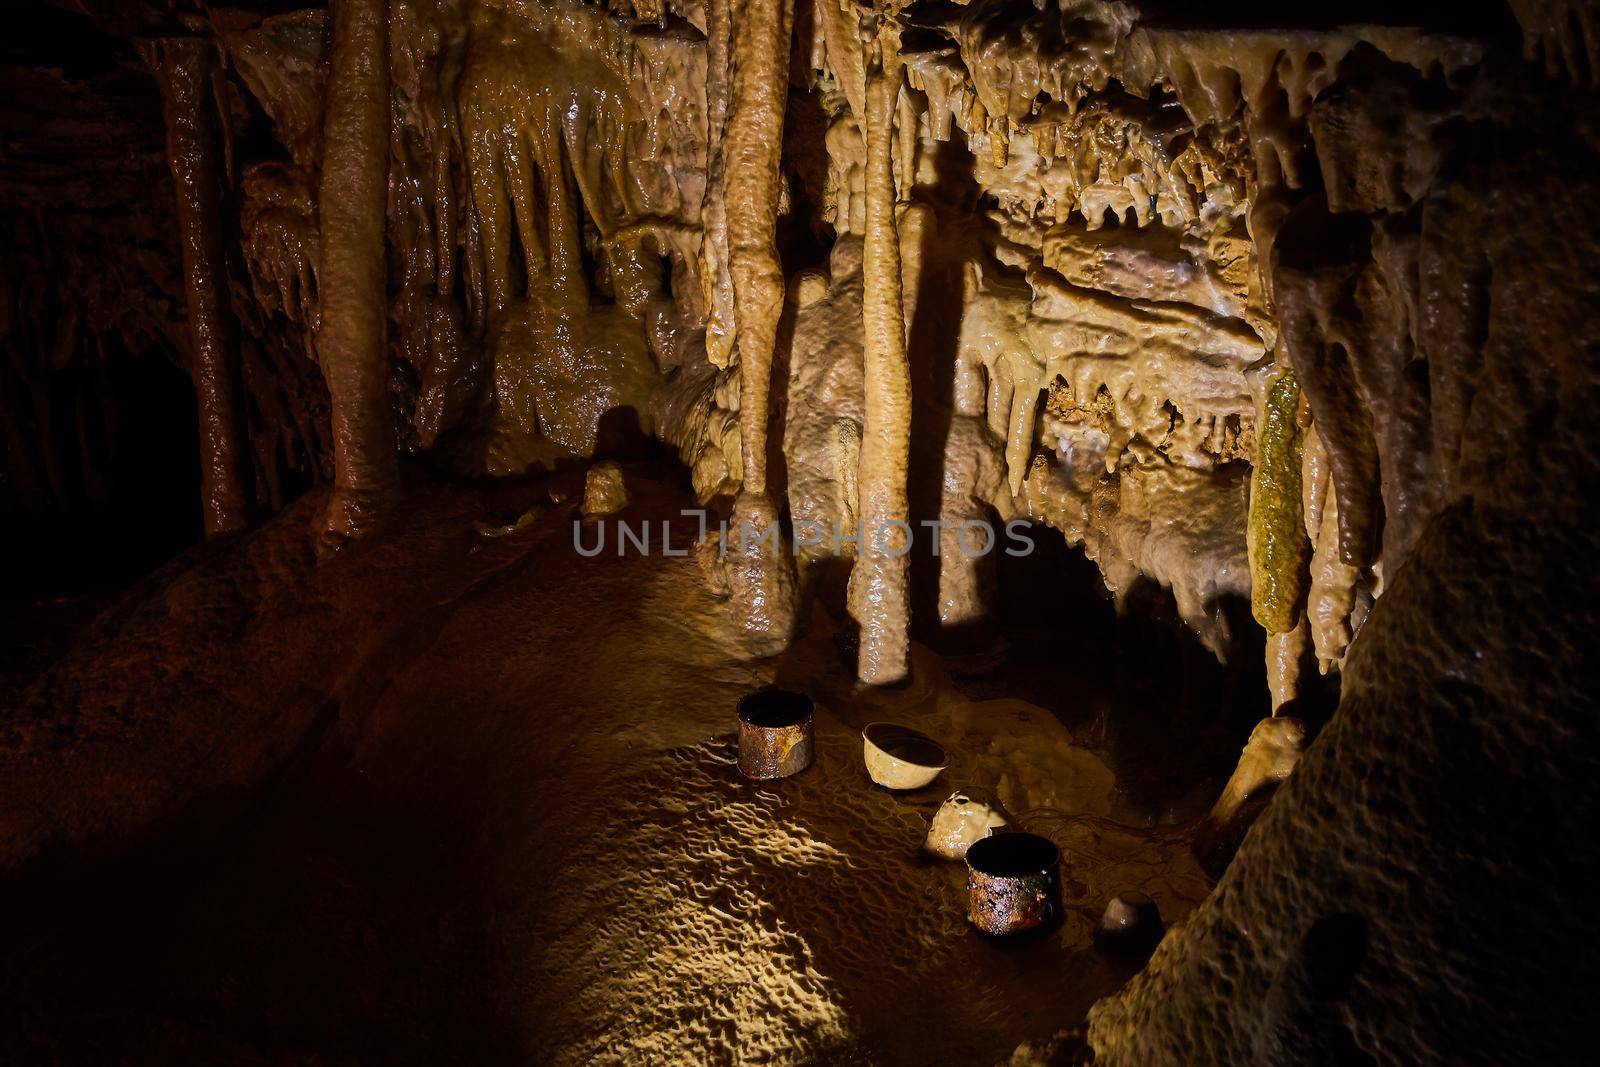 Image of Old drinking cups rusting on ground of deep cave surrounded by stalagmites and stalactites